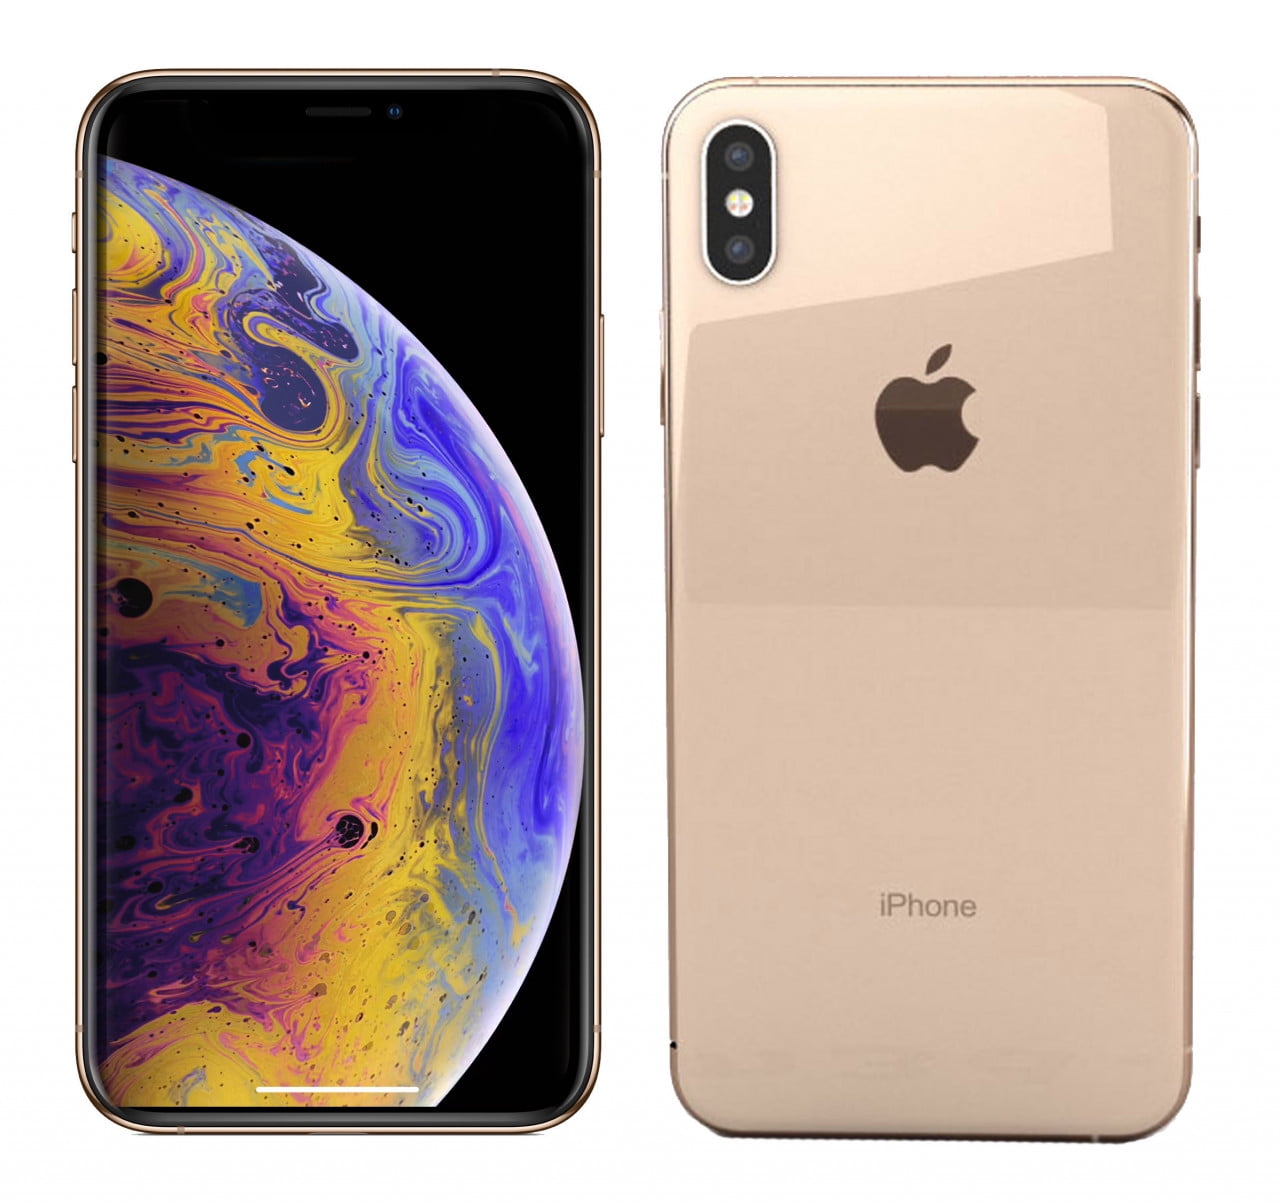 Apple iPhone XS Max A1921 256 GB Smartphone, 6.5" OLED 2688 x 1242, Dual-core (2 Core) 2.50 GHz Quad-core (4 Core) 1.60 GHz, 4 GB RAM, iOS 12, 4G, Gold